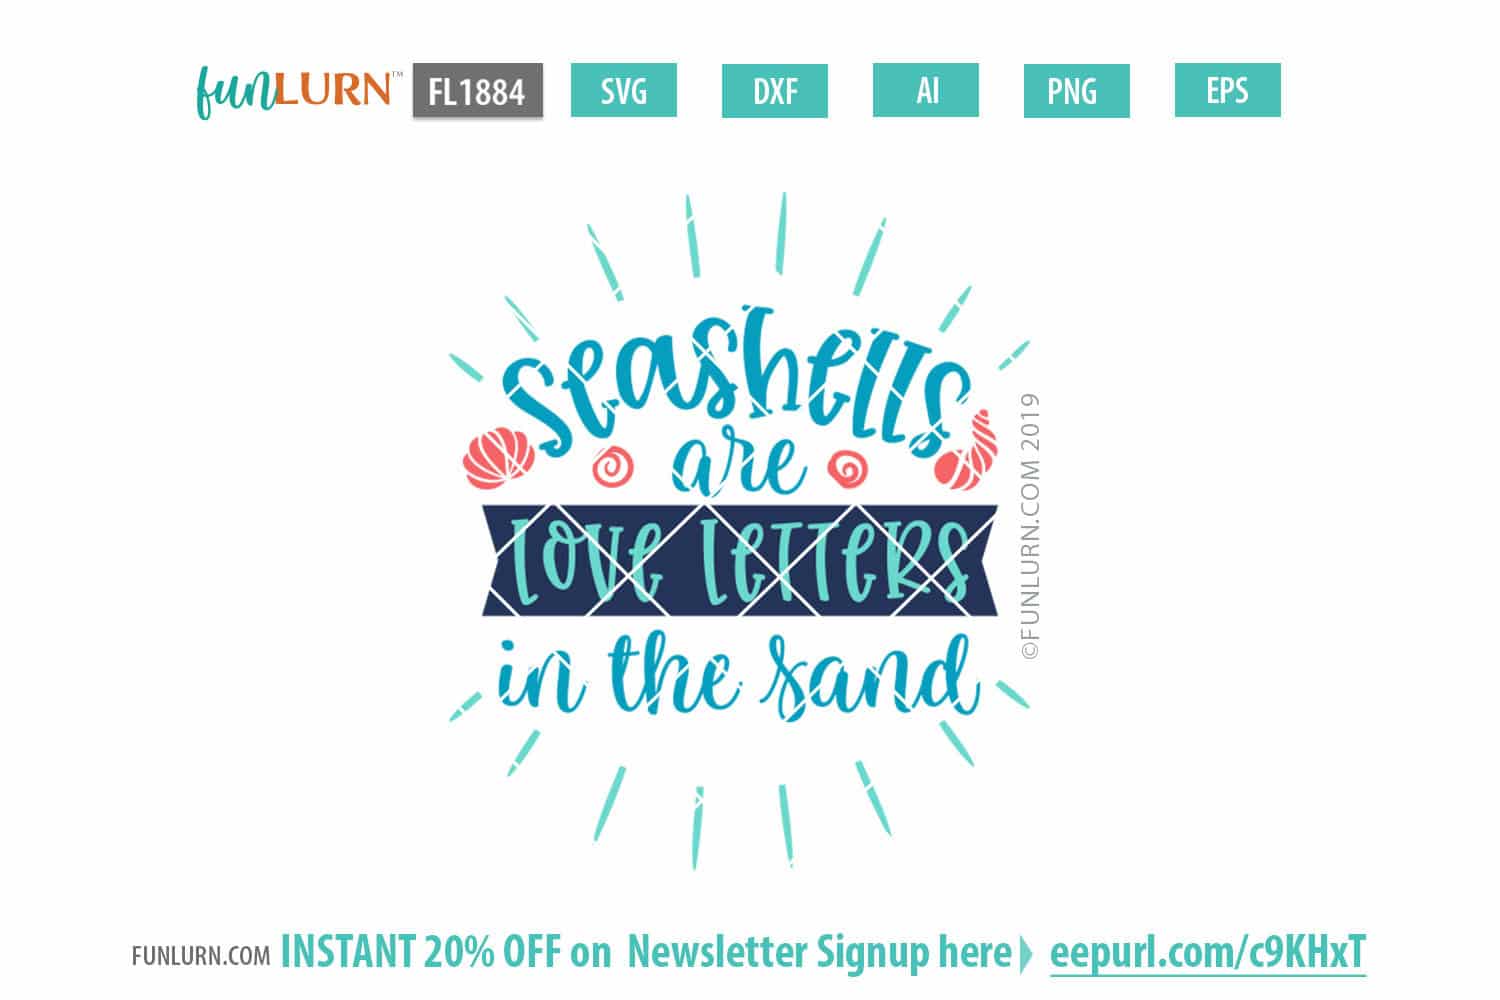 Download Seashells are love letters in the sand - FunLurn